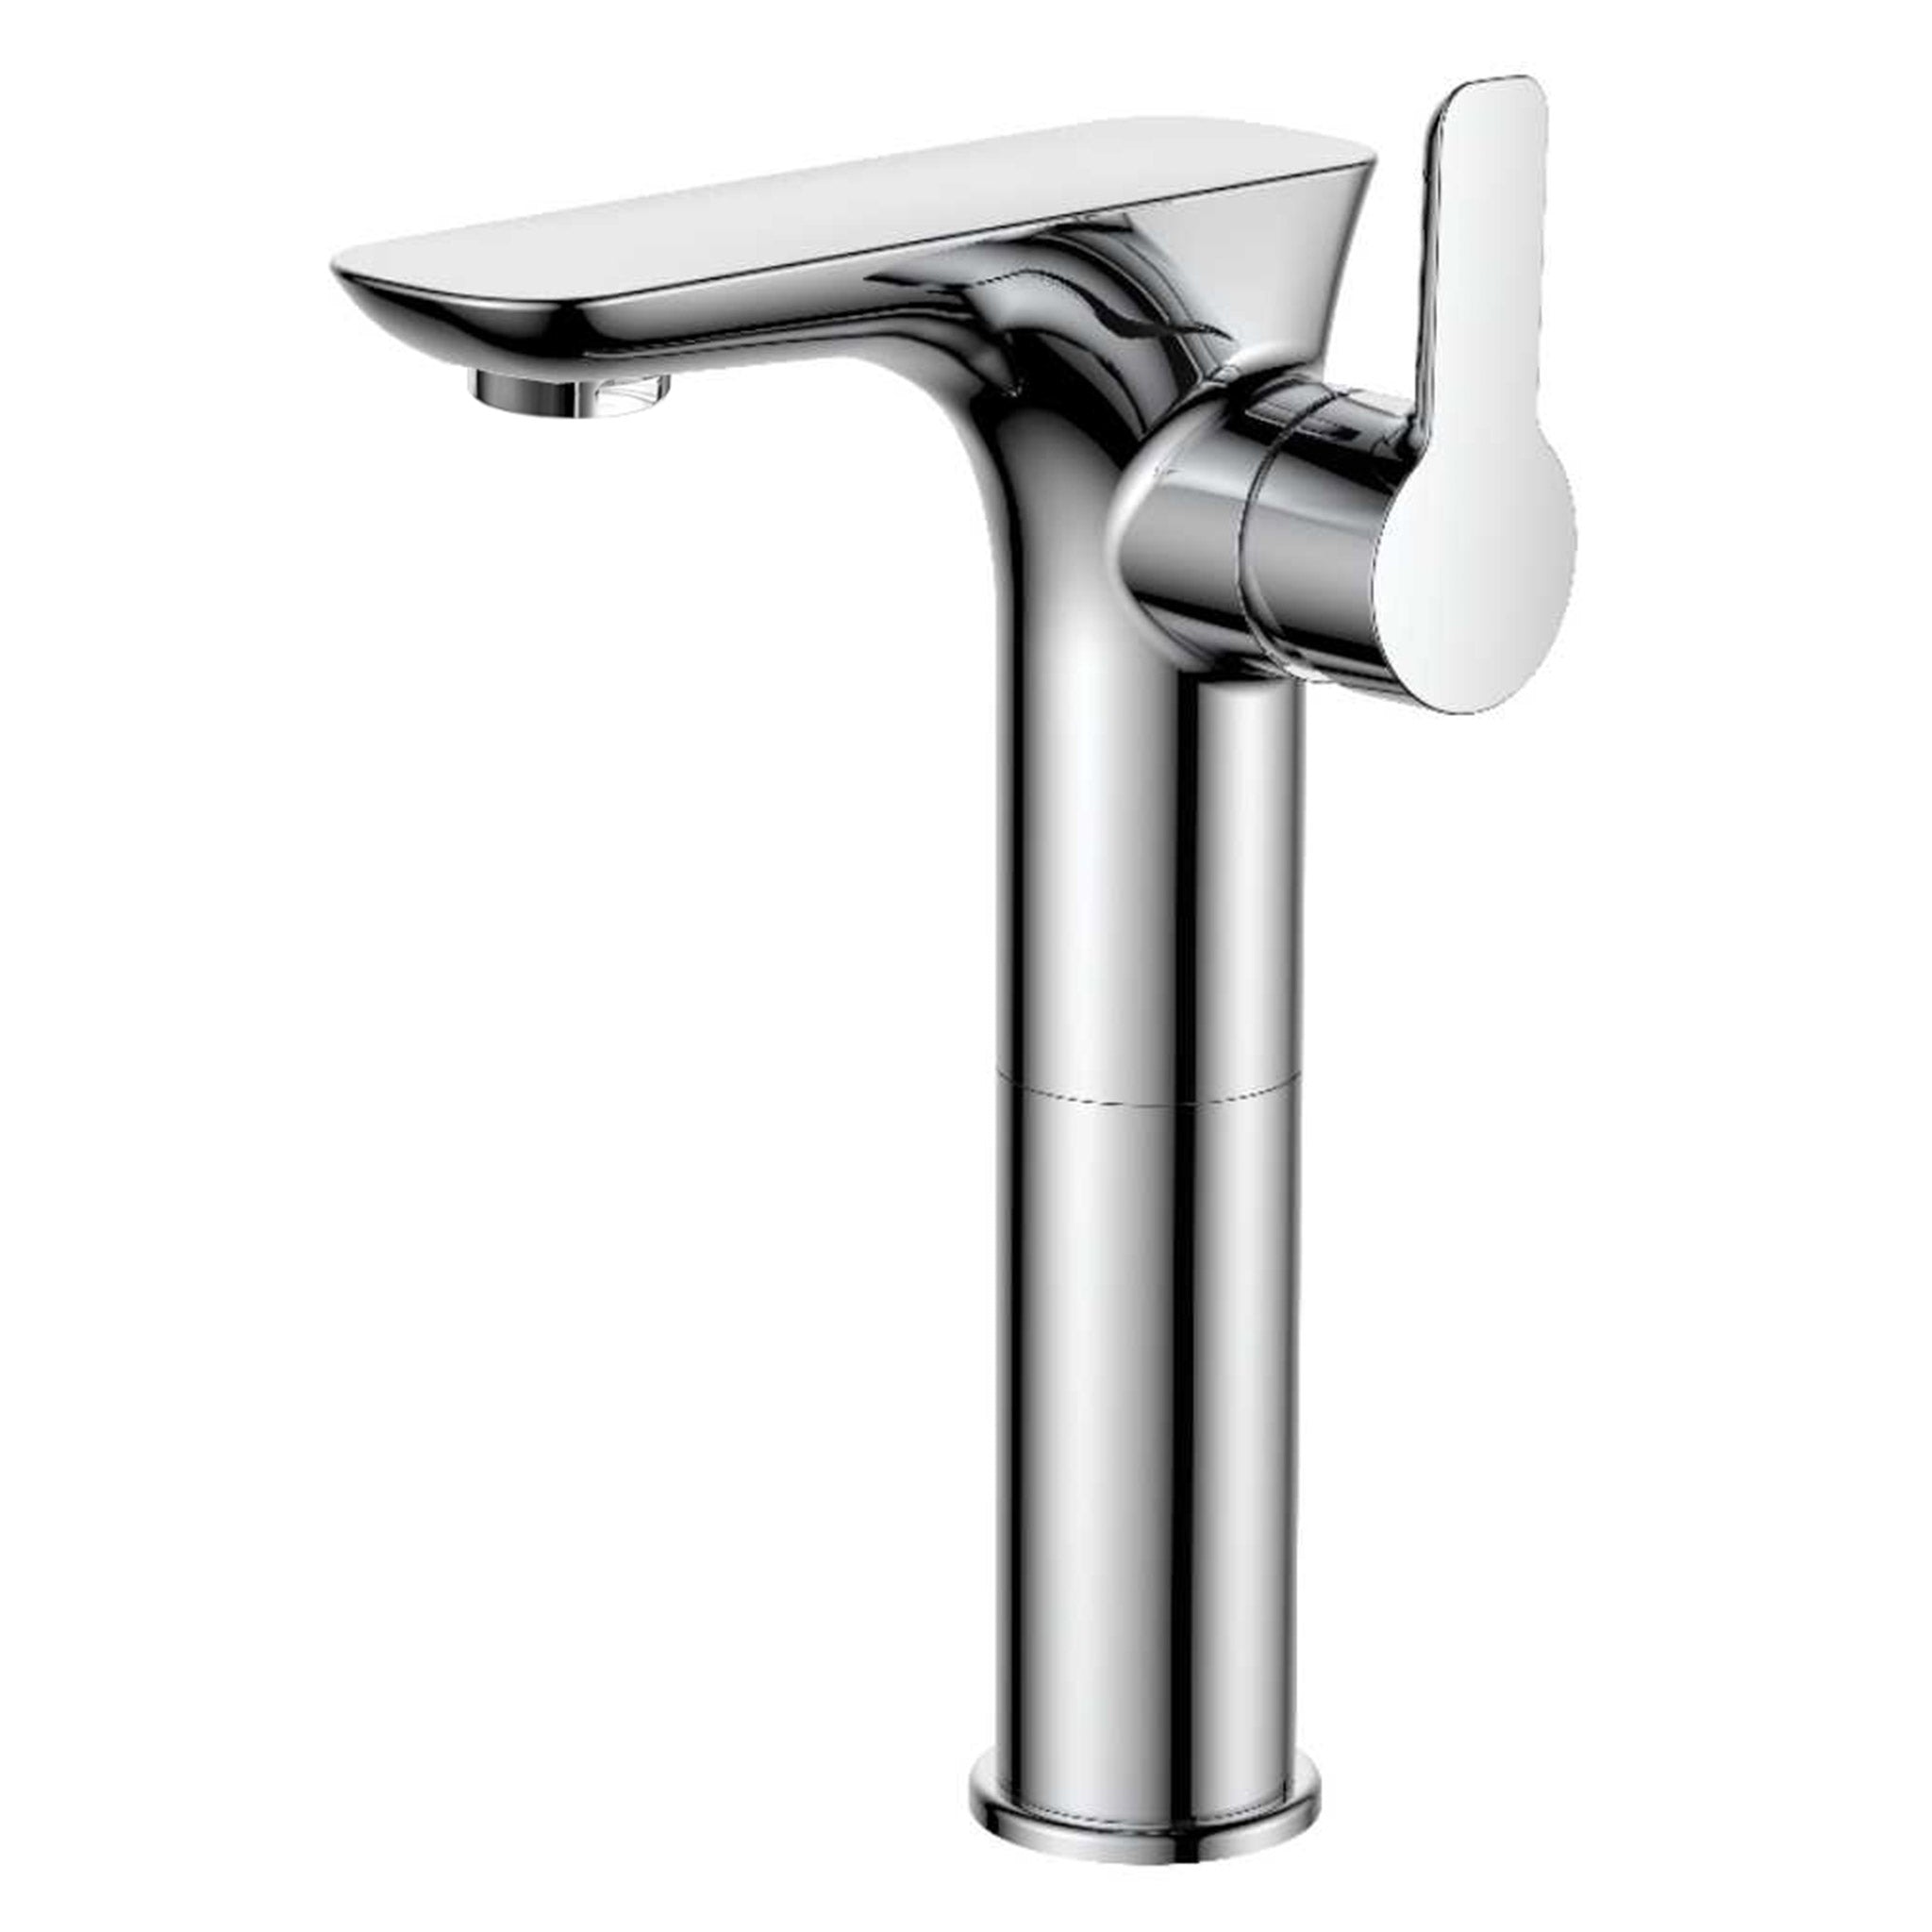 Union Luxe Tall Basin Mixer Tap